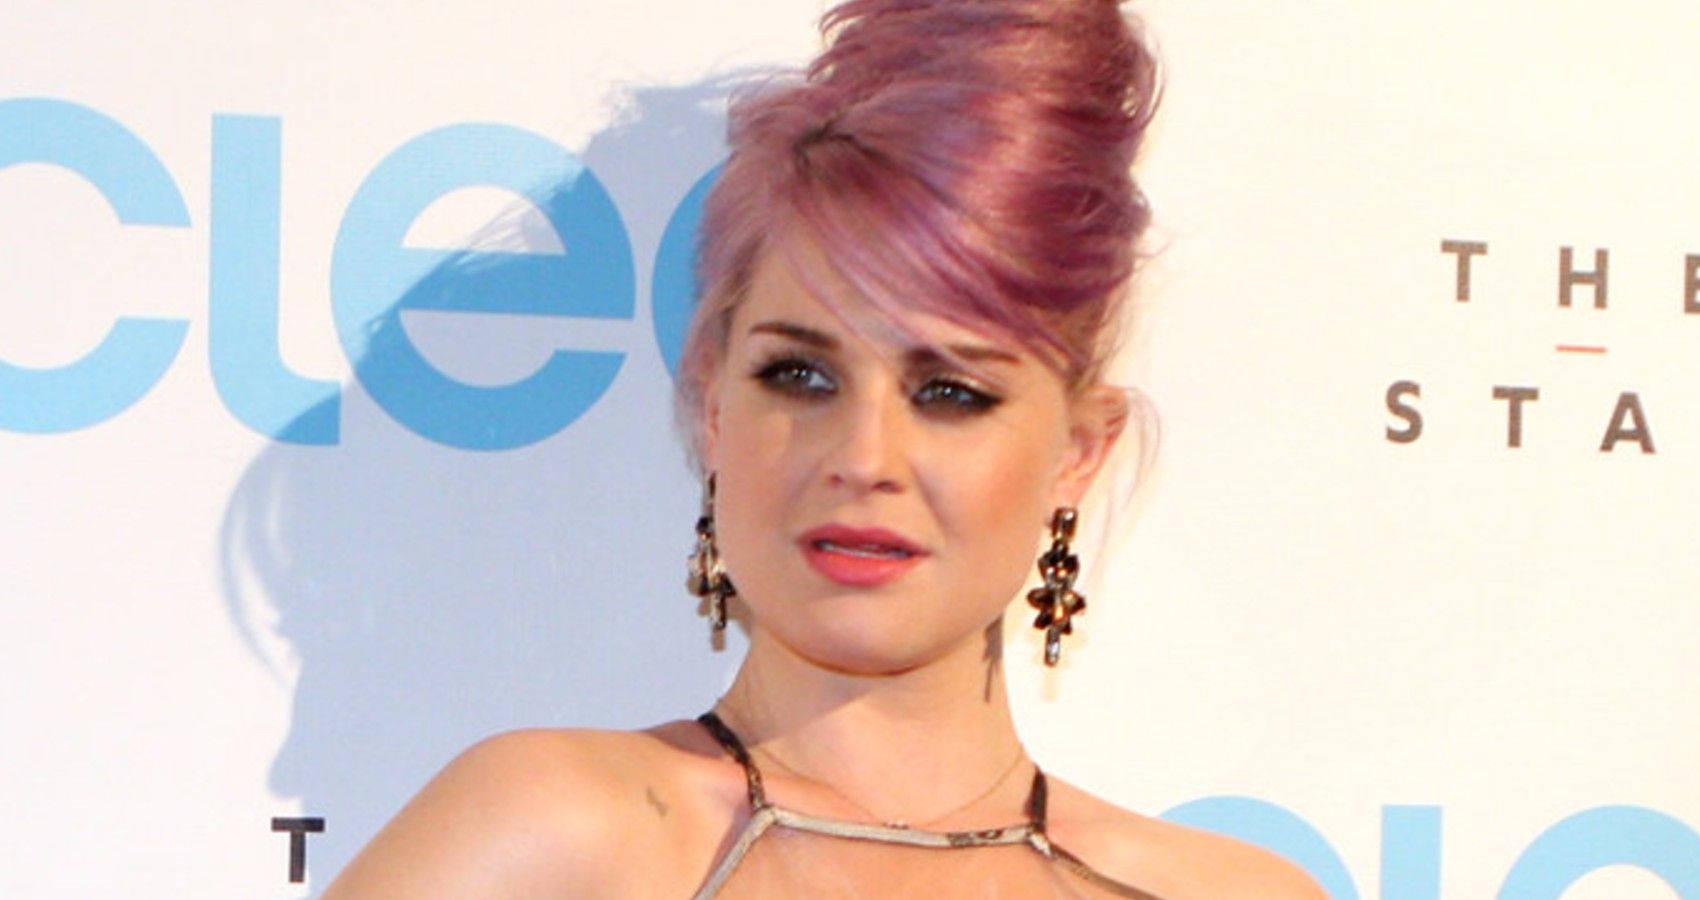 Kelly Osbourne Shares Her Diagnoses Of Gestational Diabetes To Spread Awareness